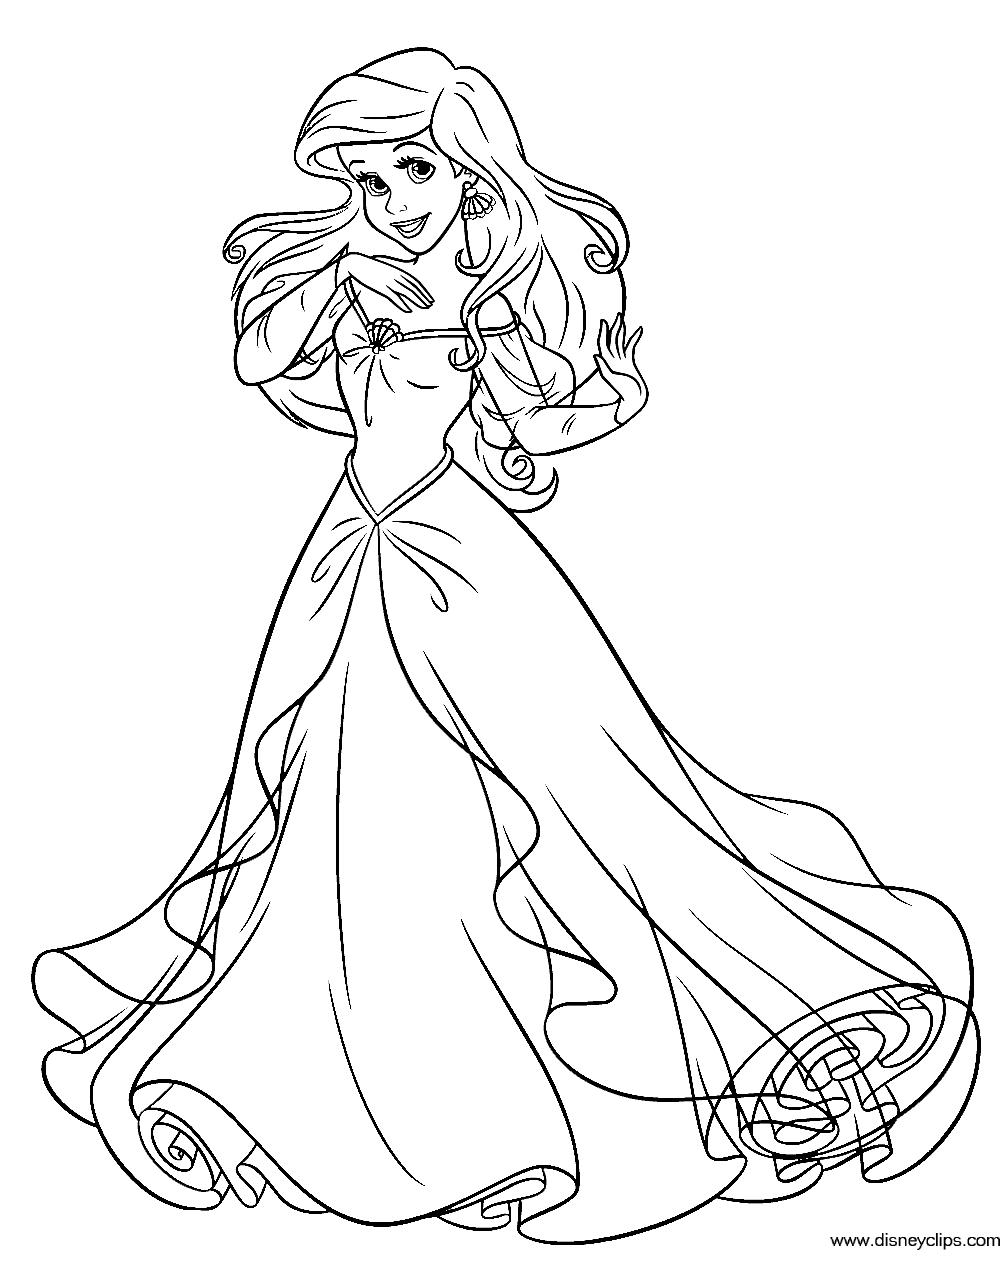 ariel little mermaid coloring pages the little mermaid printable coloring pages 3 disney pages little coloring mermaid ariel 